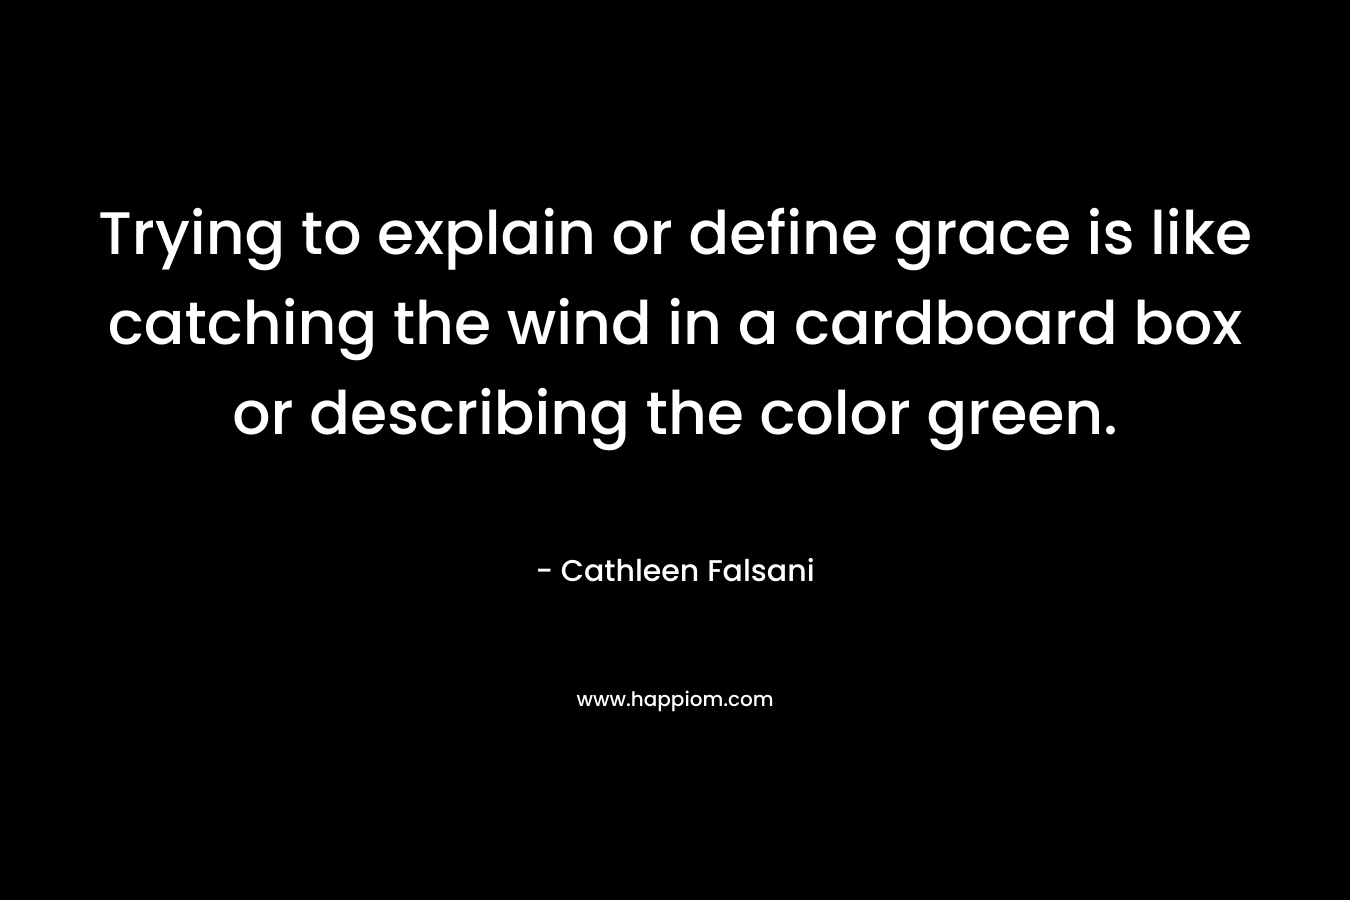 Trying to explain or define grace is like catching the wind in a cardboard box or describing the color green. – Cathleen Falsani